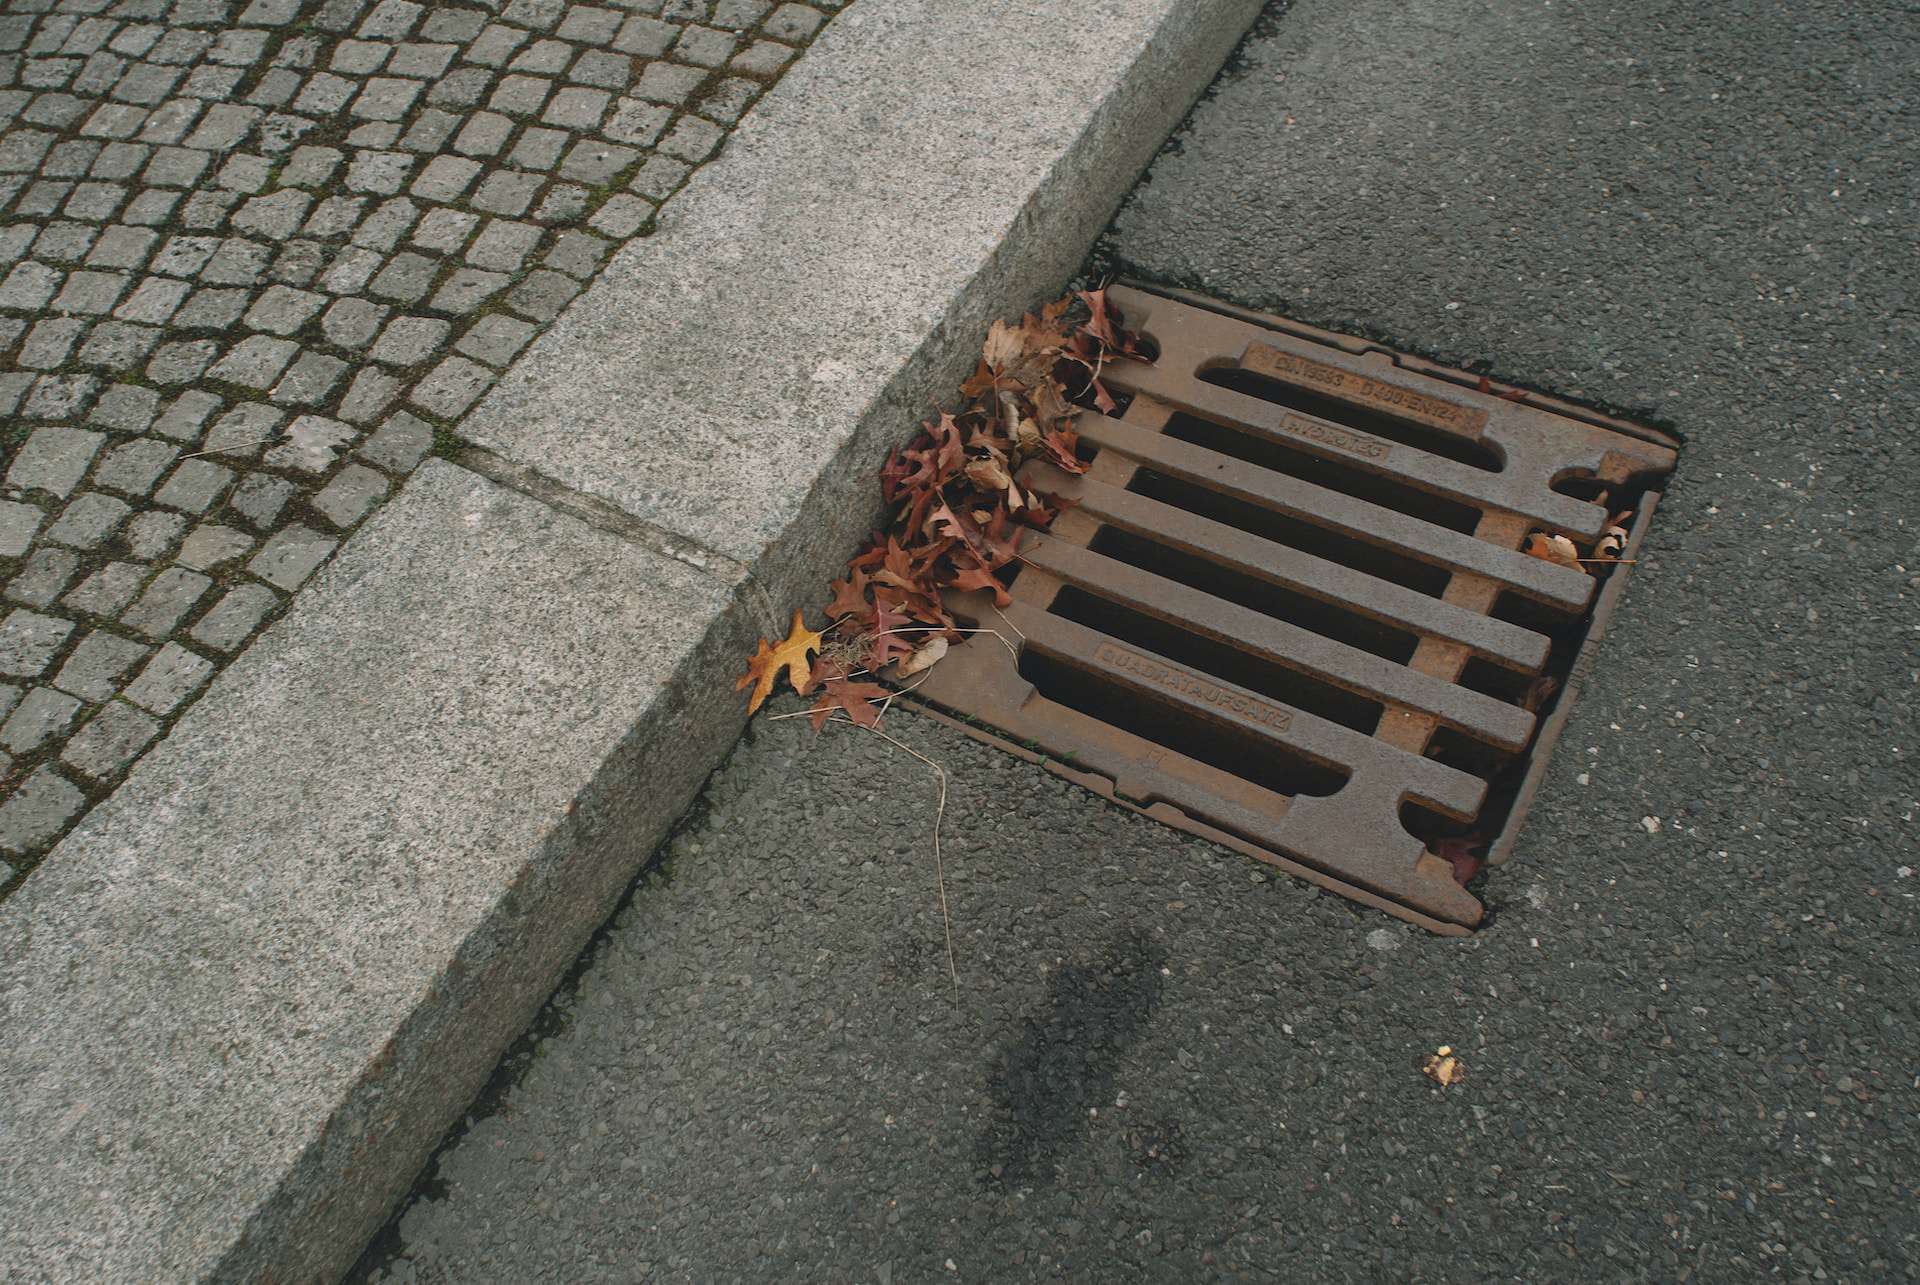 Metal drain partially covered by autumnal leaves by a pavement.